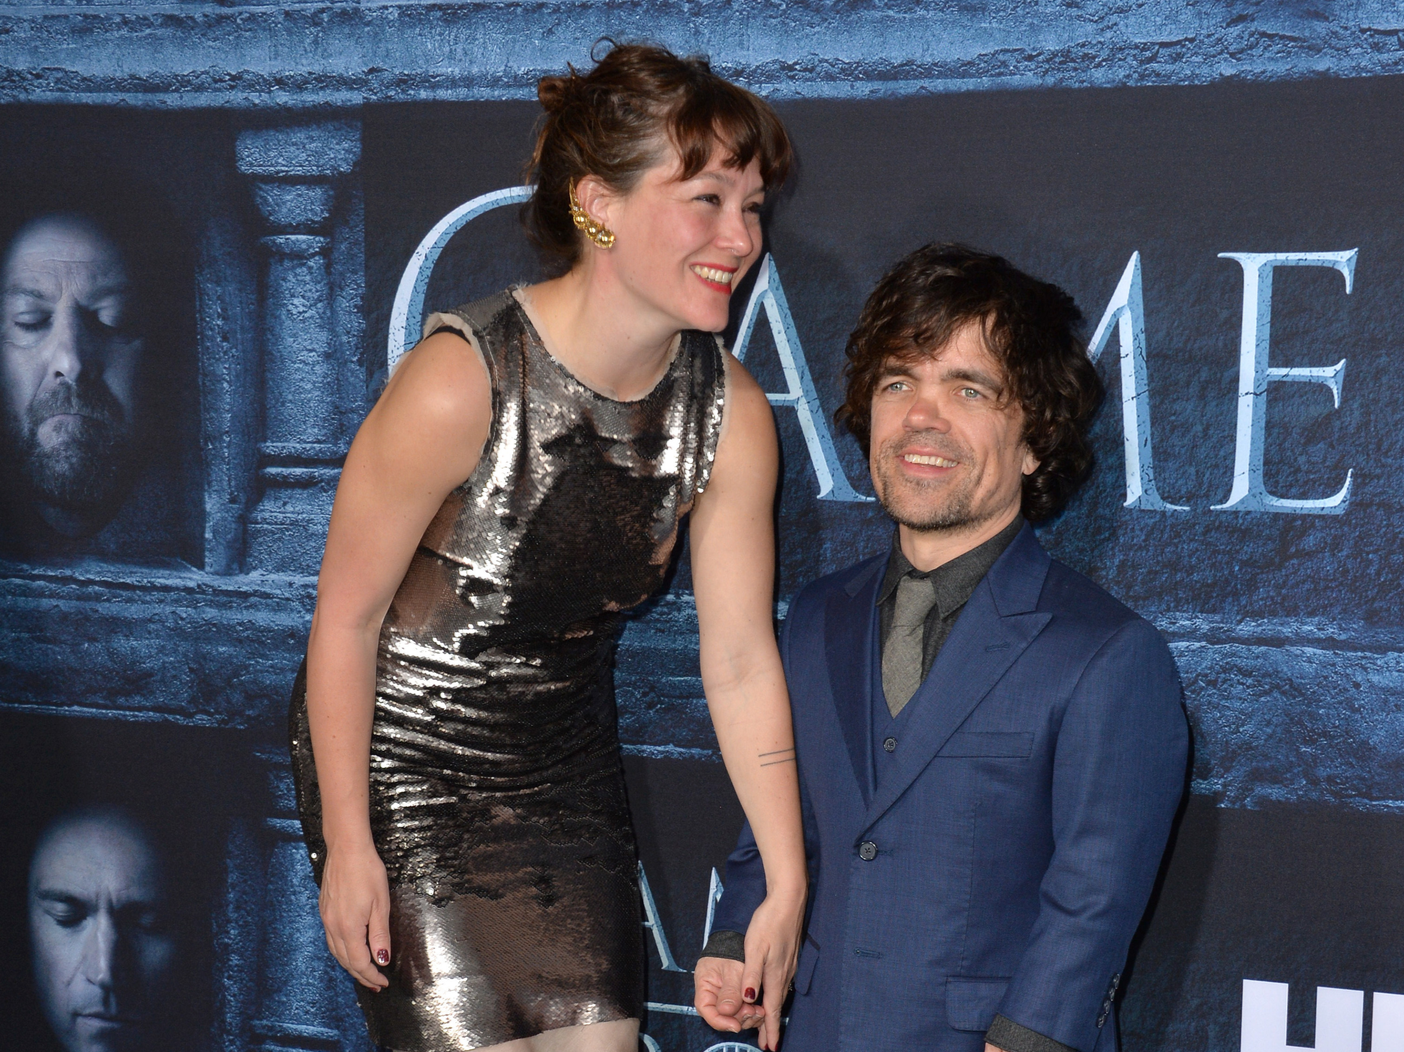 LOS ANGELES, CA. April 10, 2016: Actor Peter Dinklage & wife actress Erica Schmidt at the season 6 premiere of Game of Thrones at the TCL Chinese Theatre, Hollywood.